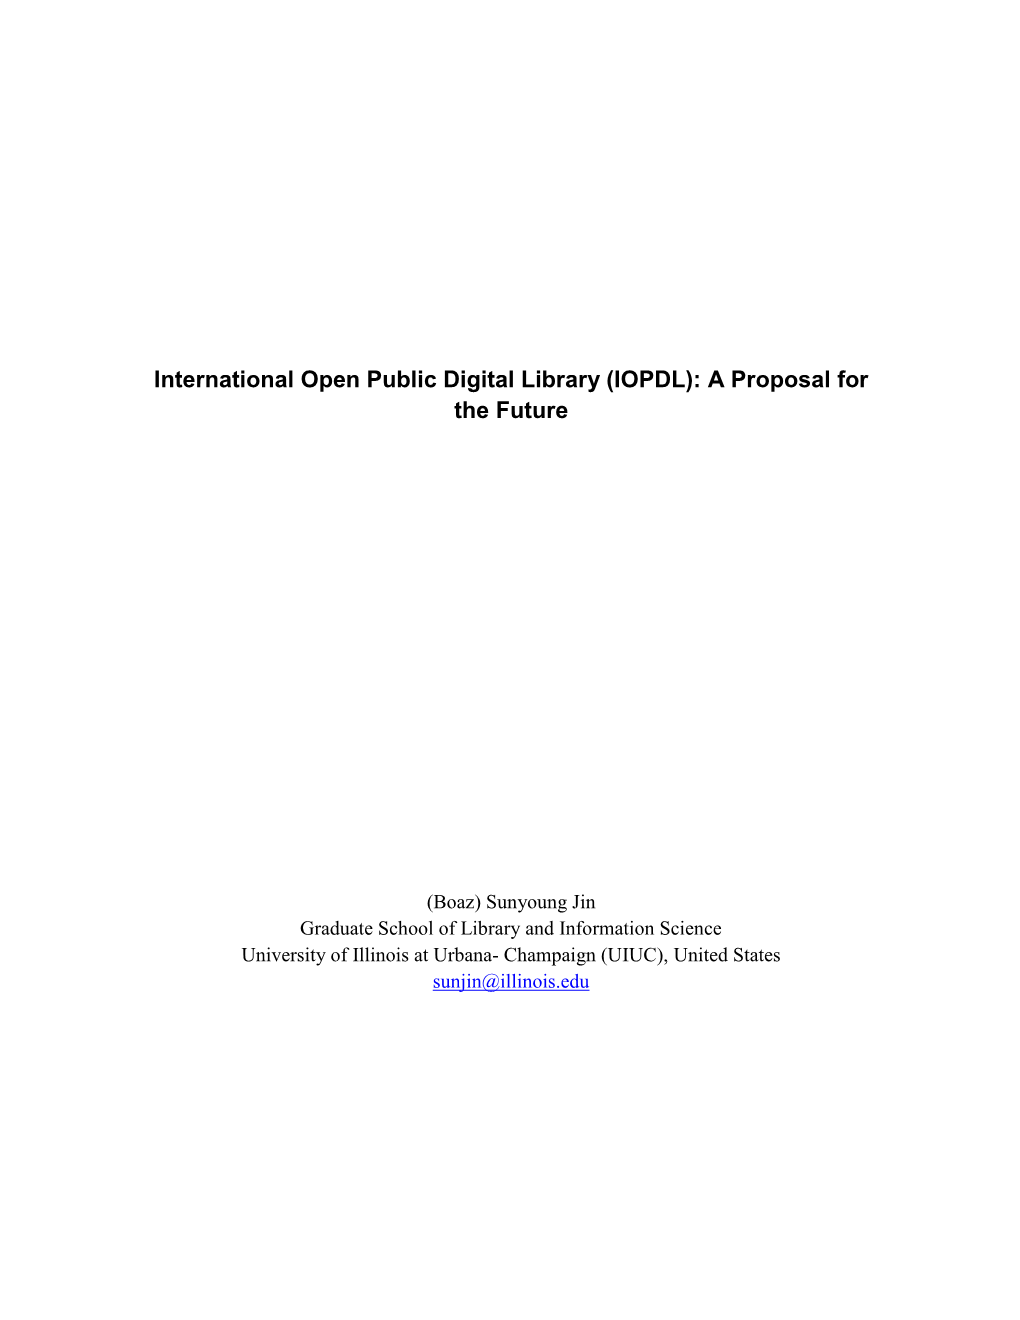 International Open Public Digital Library (IOPDL): a Proposal for the Future